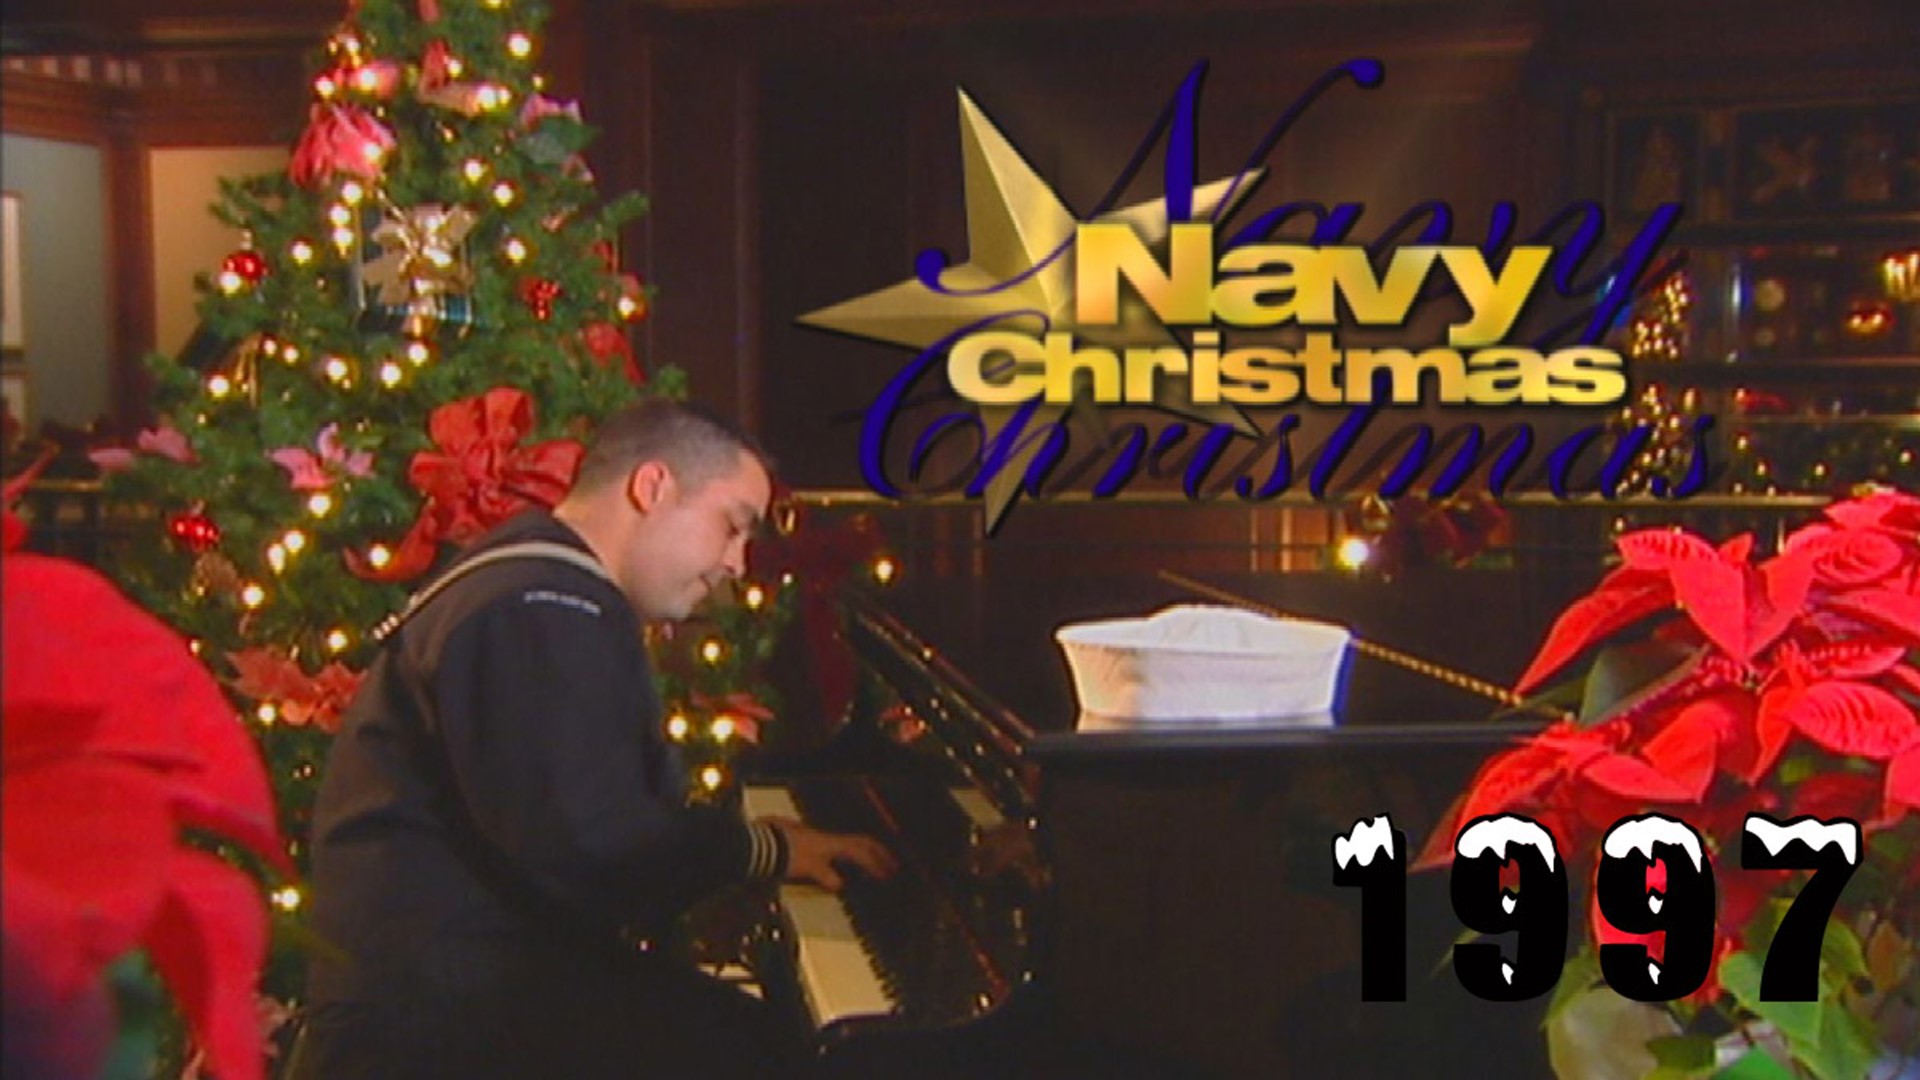 For more than 35 years, 13News Now has honored our military men & women with an annual holiday special. This is the 12th annual Navy Christmas, which aired in 1997.